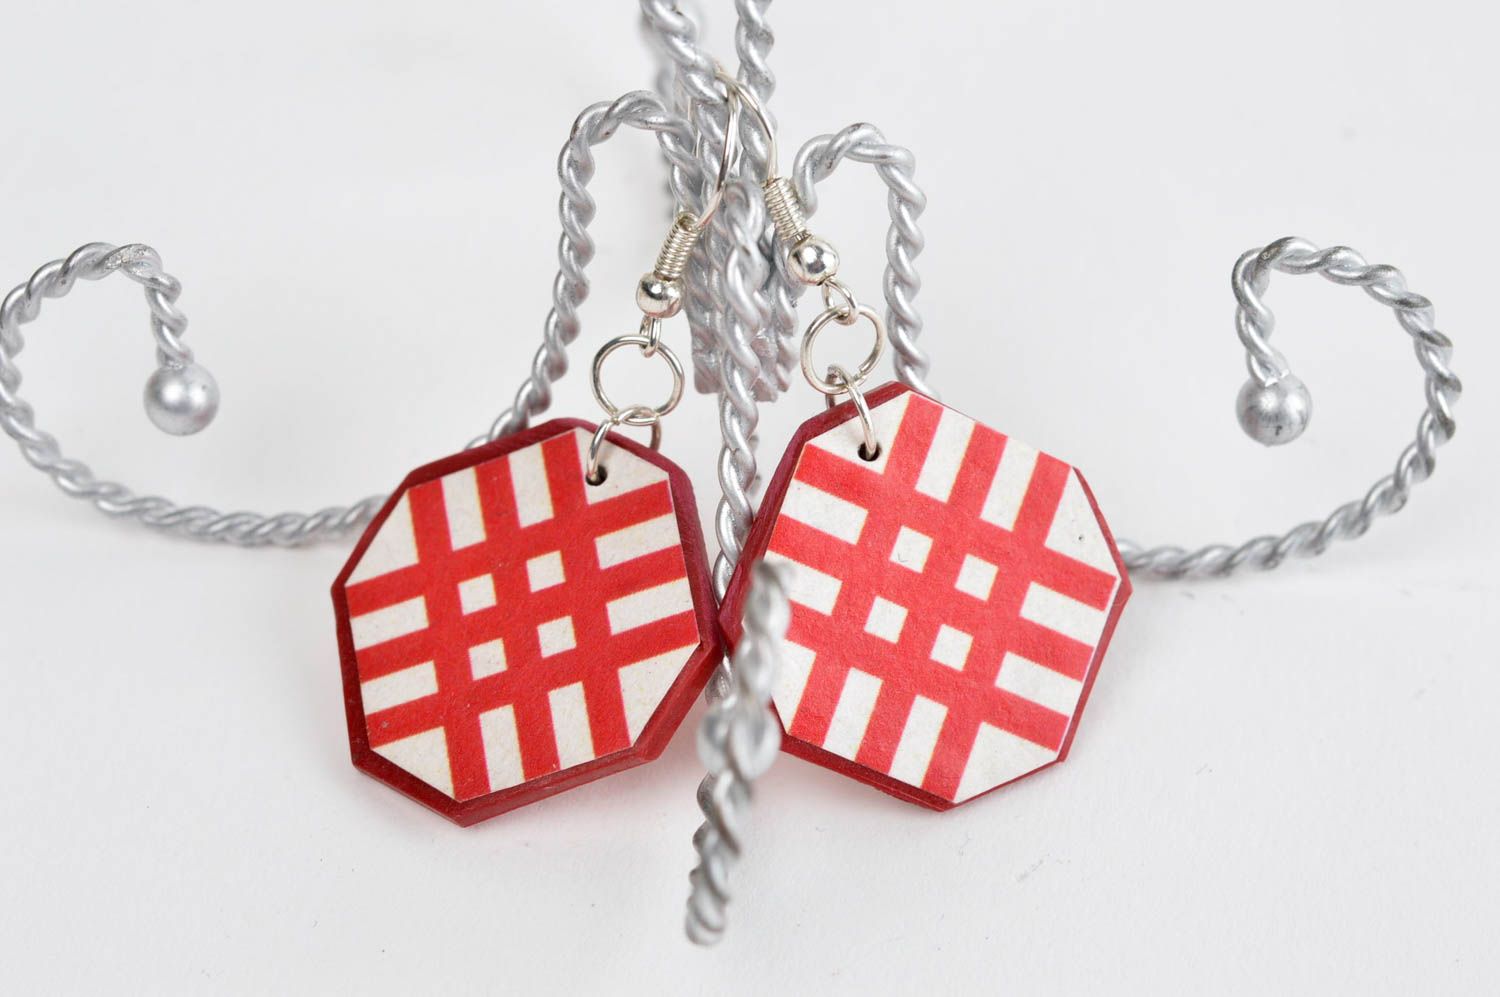 Red handmade wooden earrings fashion accessories wood craft small gifts photo 1